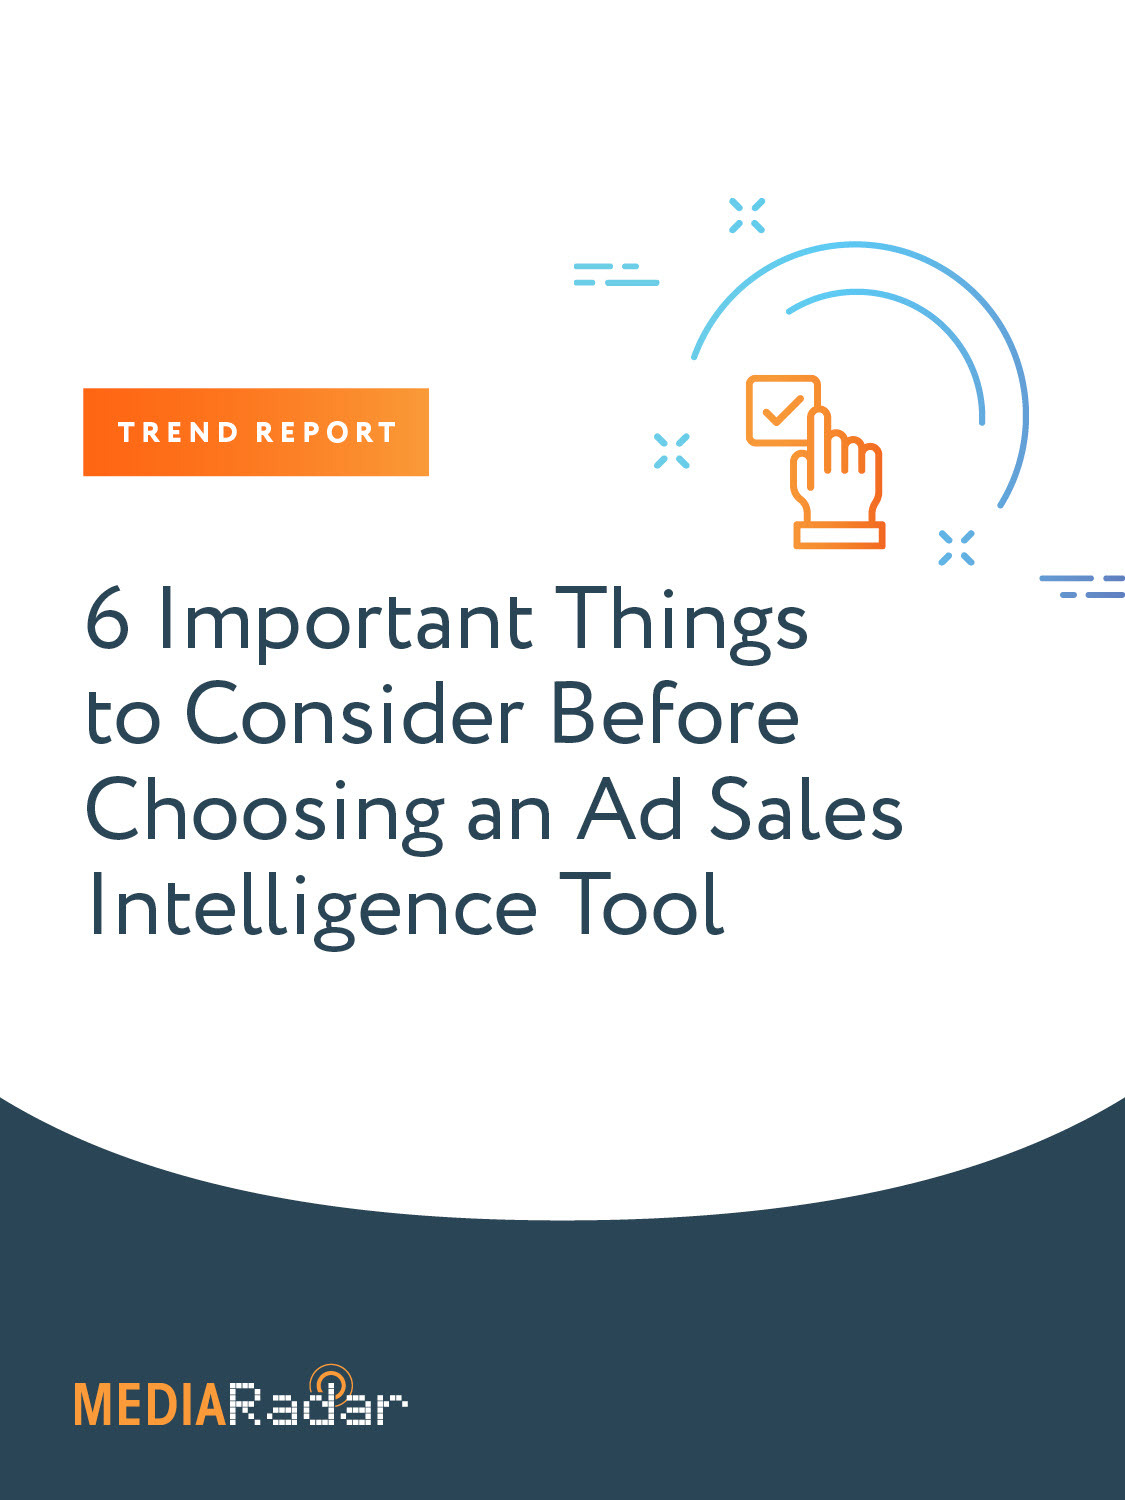 6 Important Things to Consider Before Choosing an Ad Sales Intelligence Tool